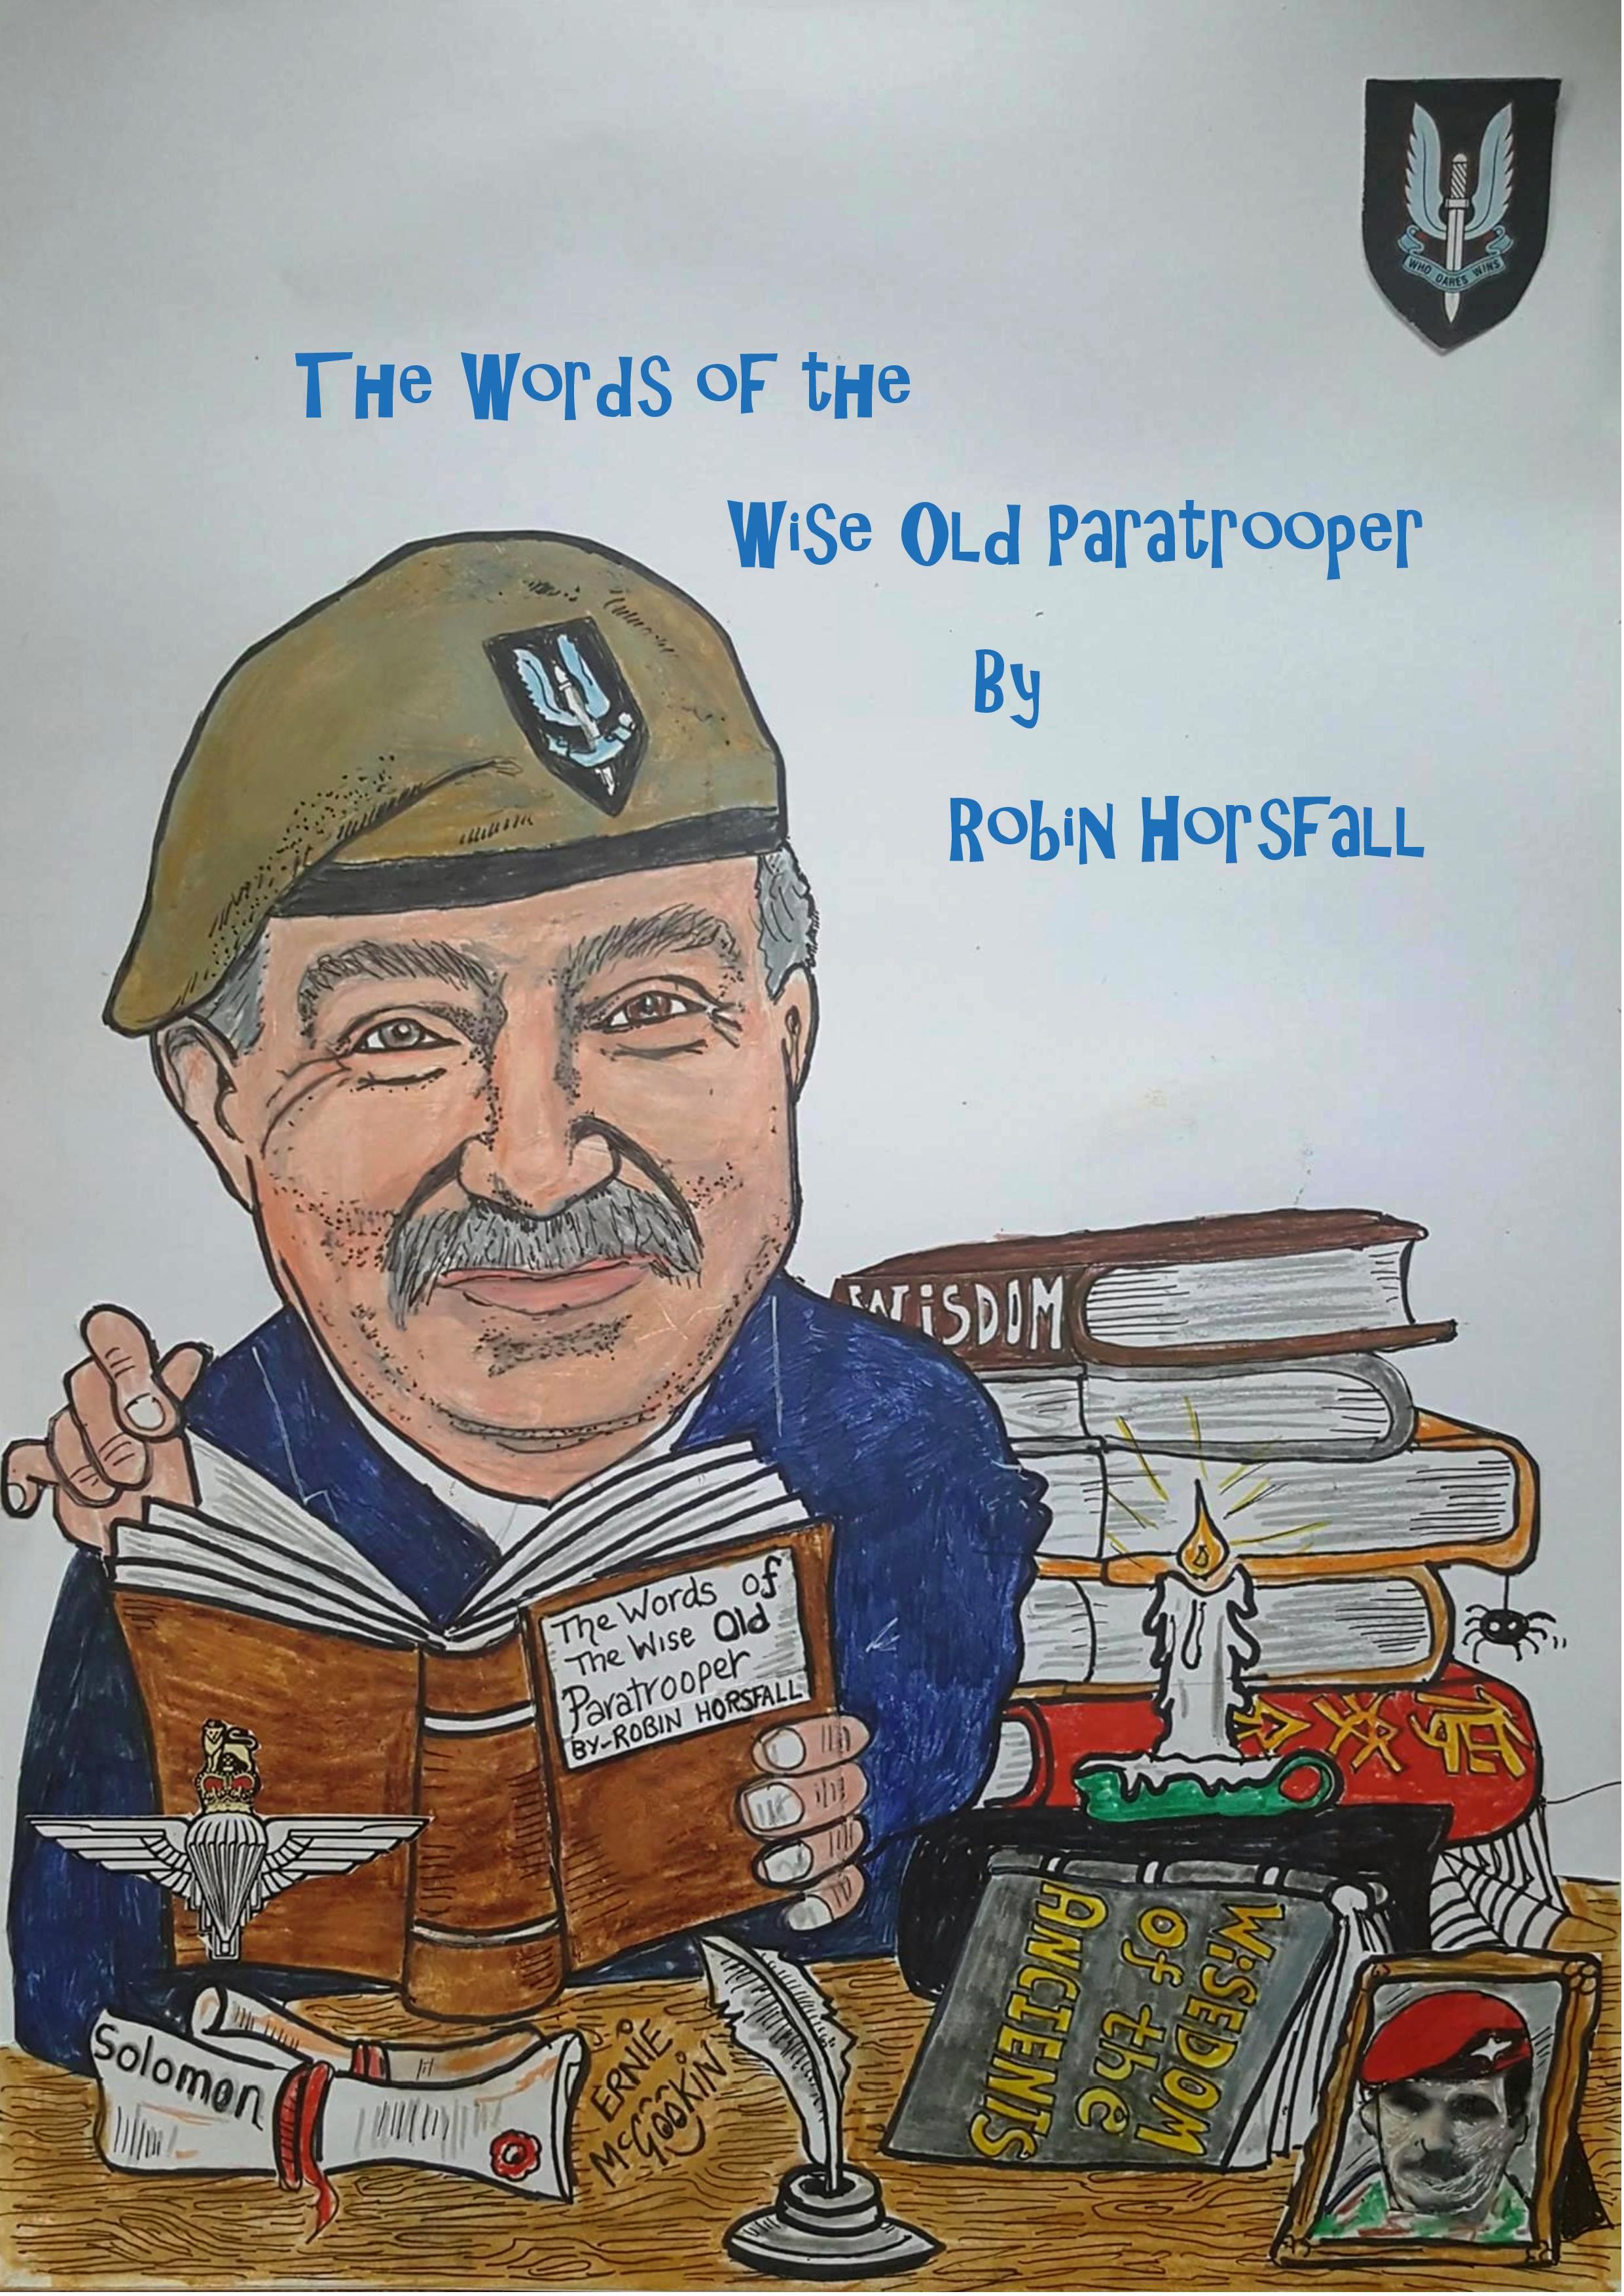 The Words of The Wise Old Paratrooper – A review